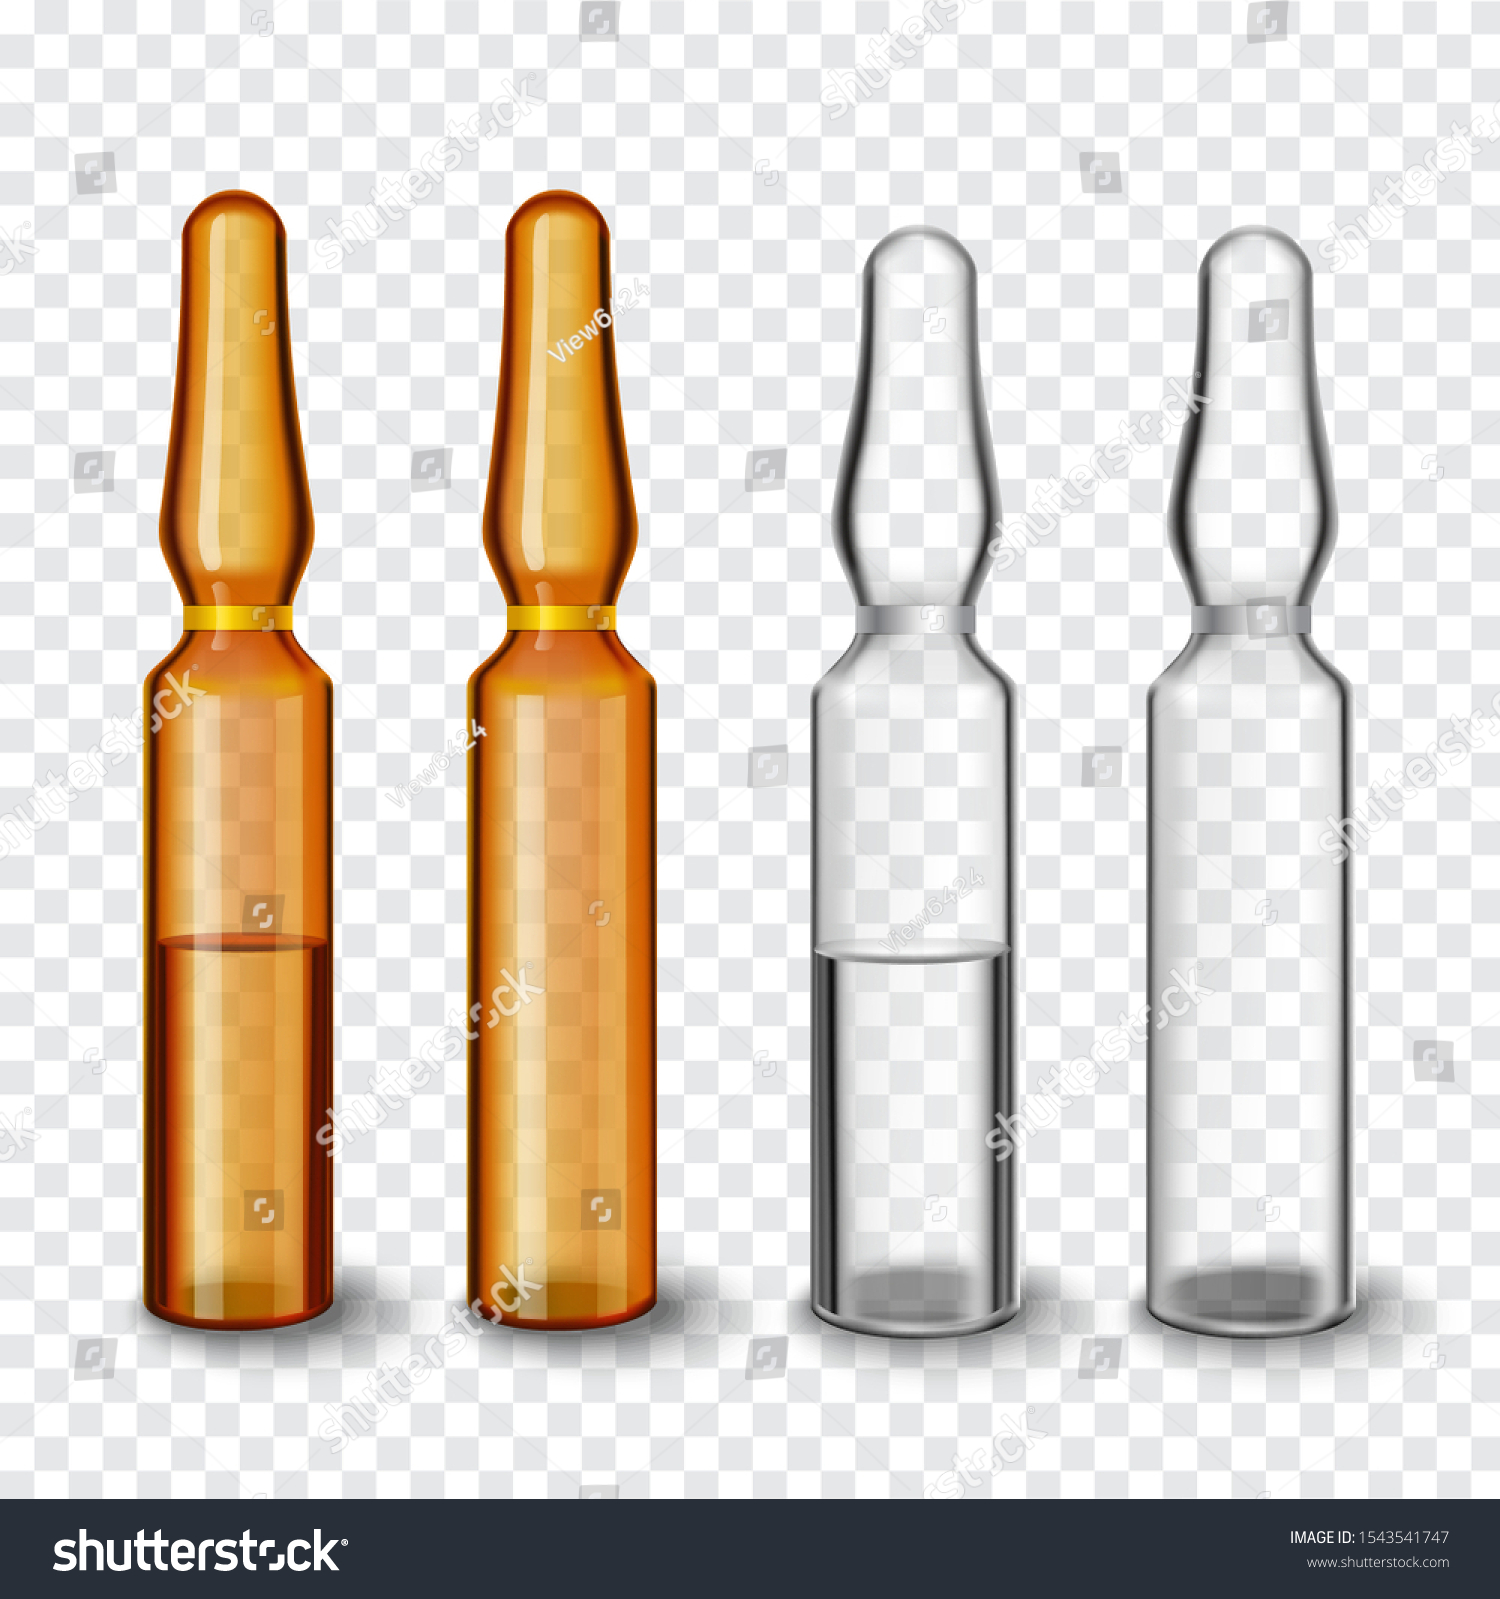 Download Transparent Glass Ampoules Vector Illustration Stock Vector Royalty Free 1543541747 PSD Mockup Templates